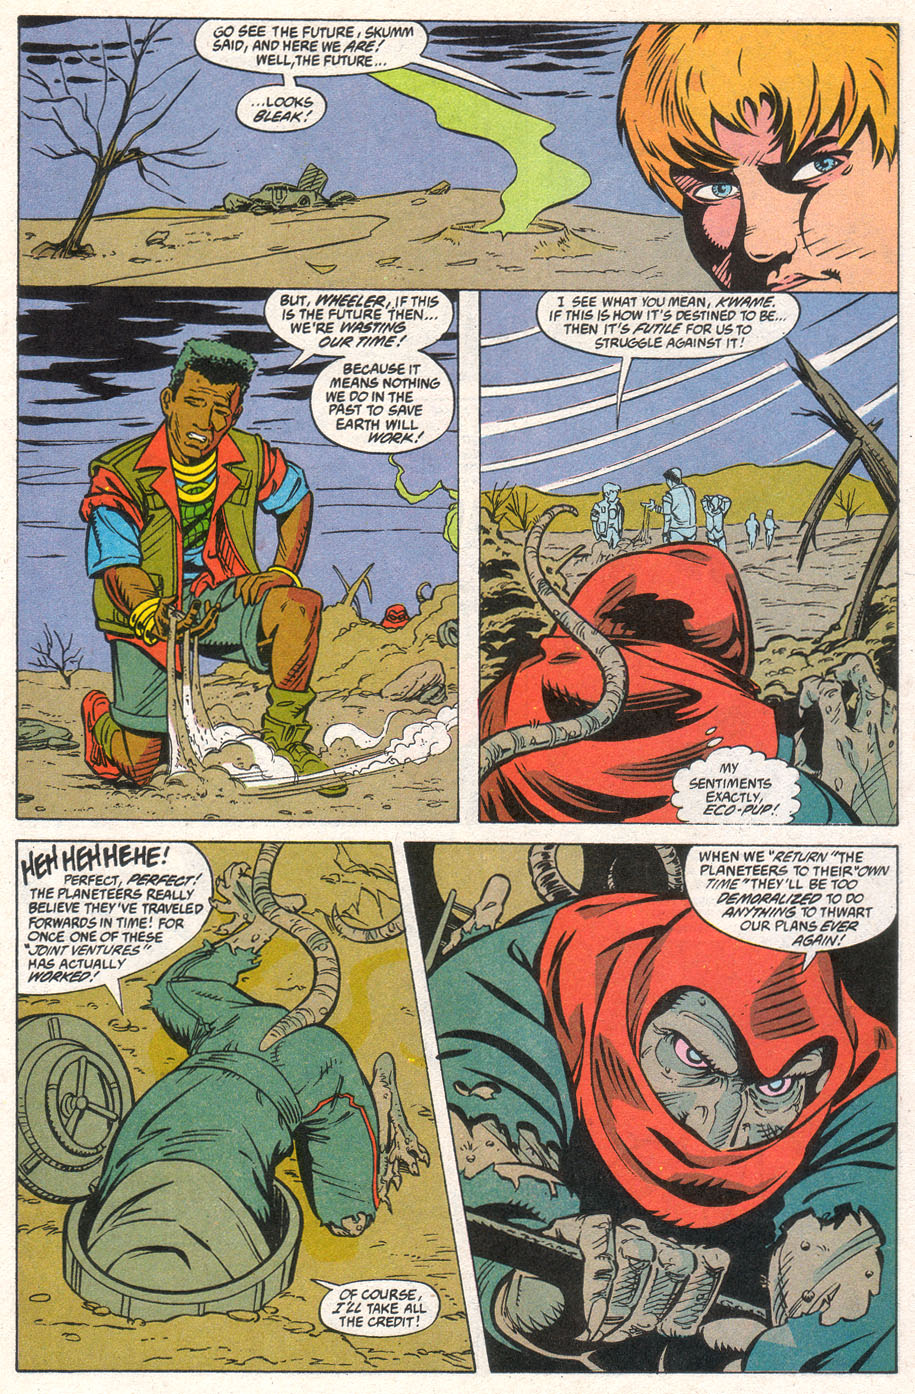 Captain Planet and the Planeteers 12 Page 19